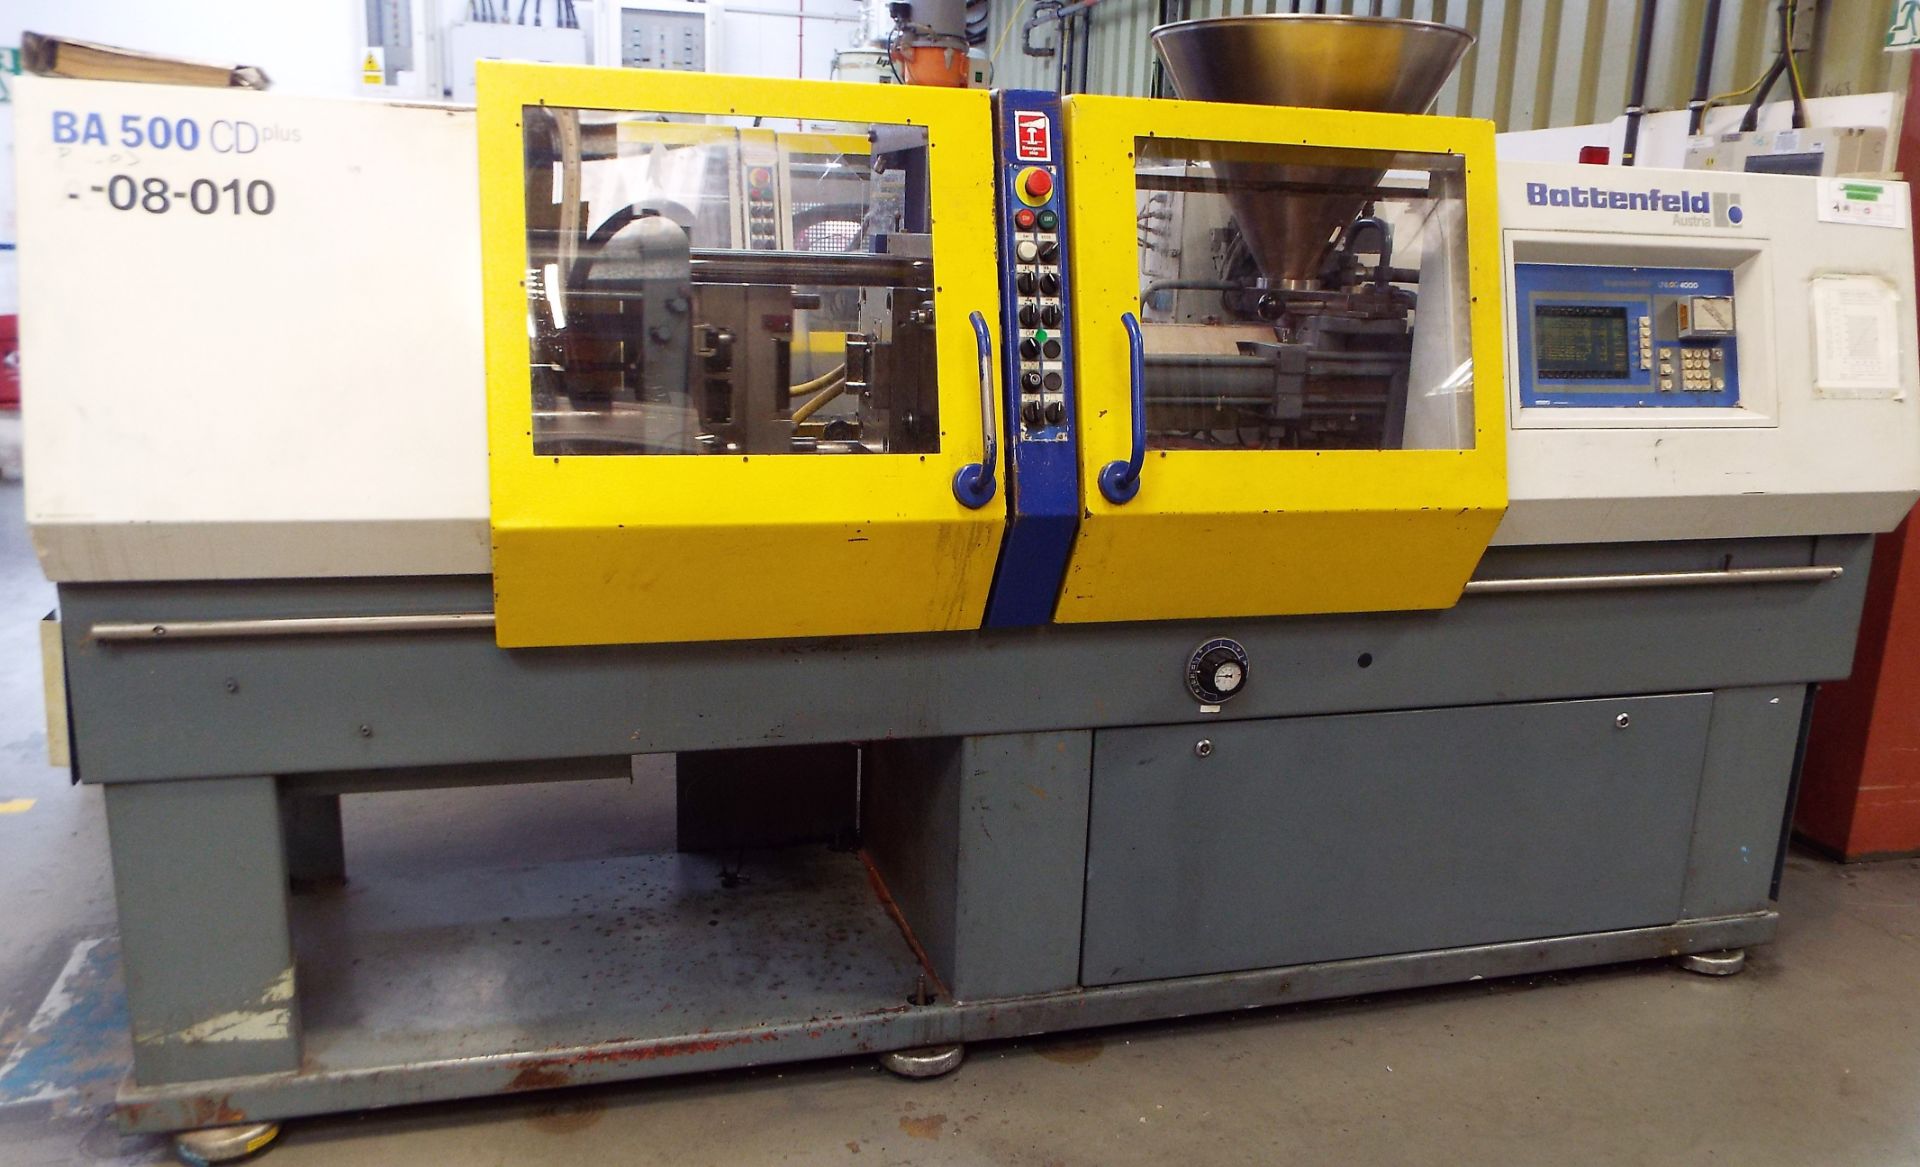 This is for a used Battenfeld BA500 CD Plus Plastic Injection Moulding Machine cw Unilog 4000 - Image 3 of 17